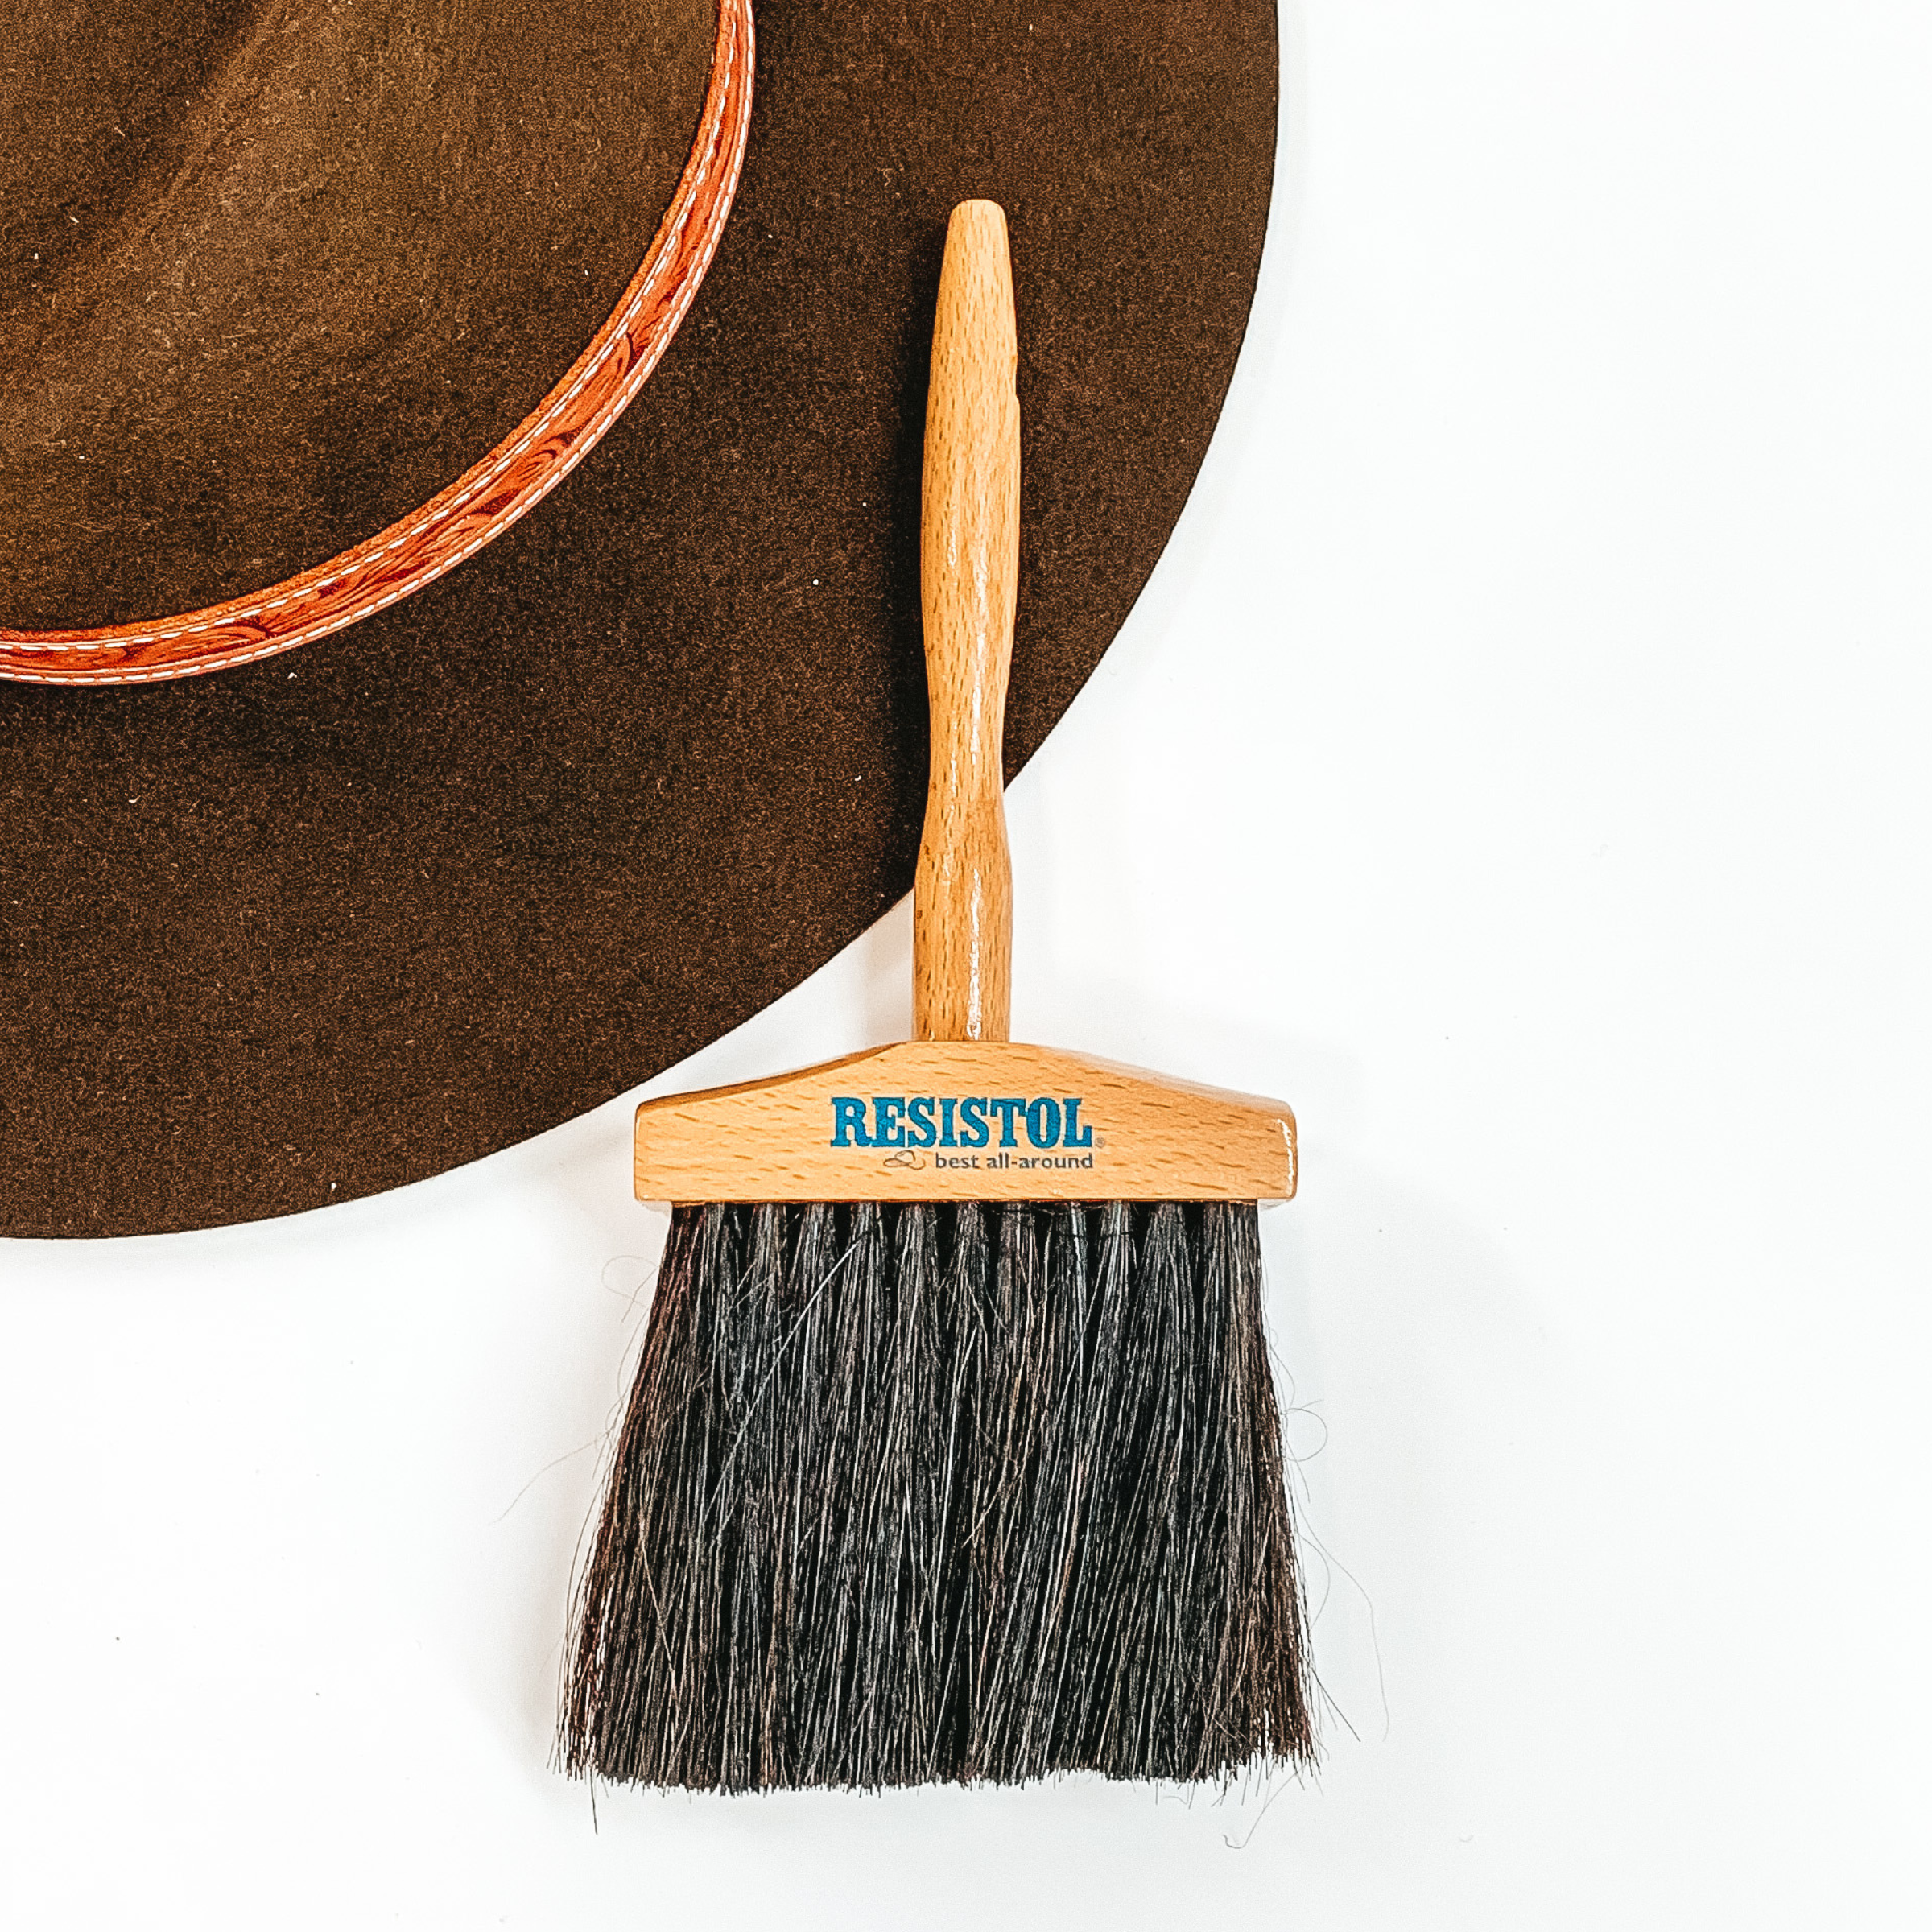 Wide, brown bristle brush with a wooden handle, This brush is pictured partially laying on a brown hat on a white background. 